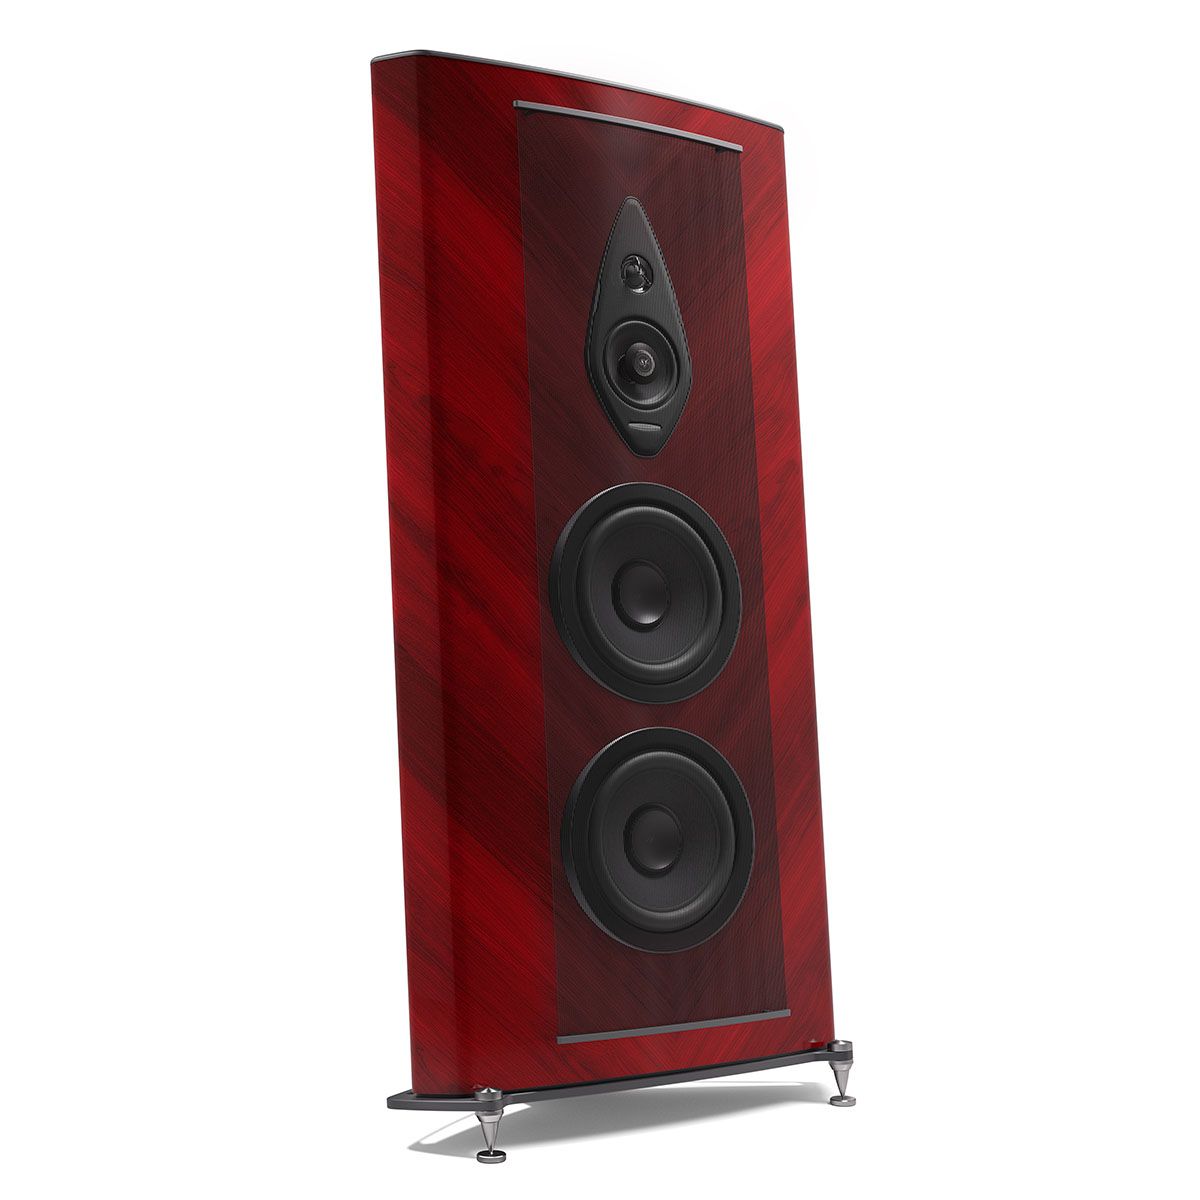 Sonus Faber Stradivari Gen2 - Red High Gloss - Pair angled front view with grille